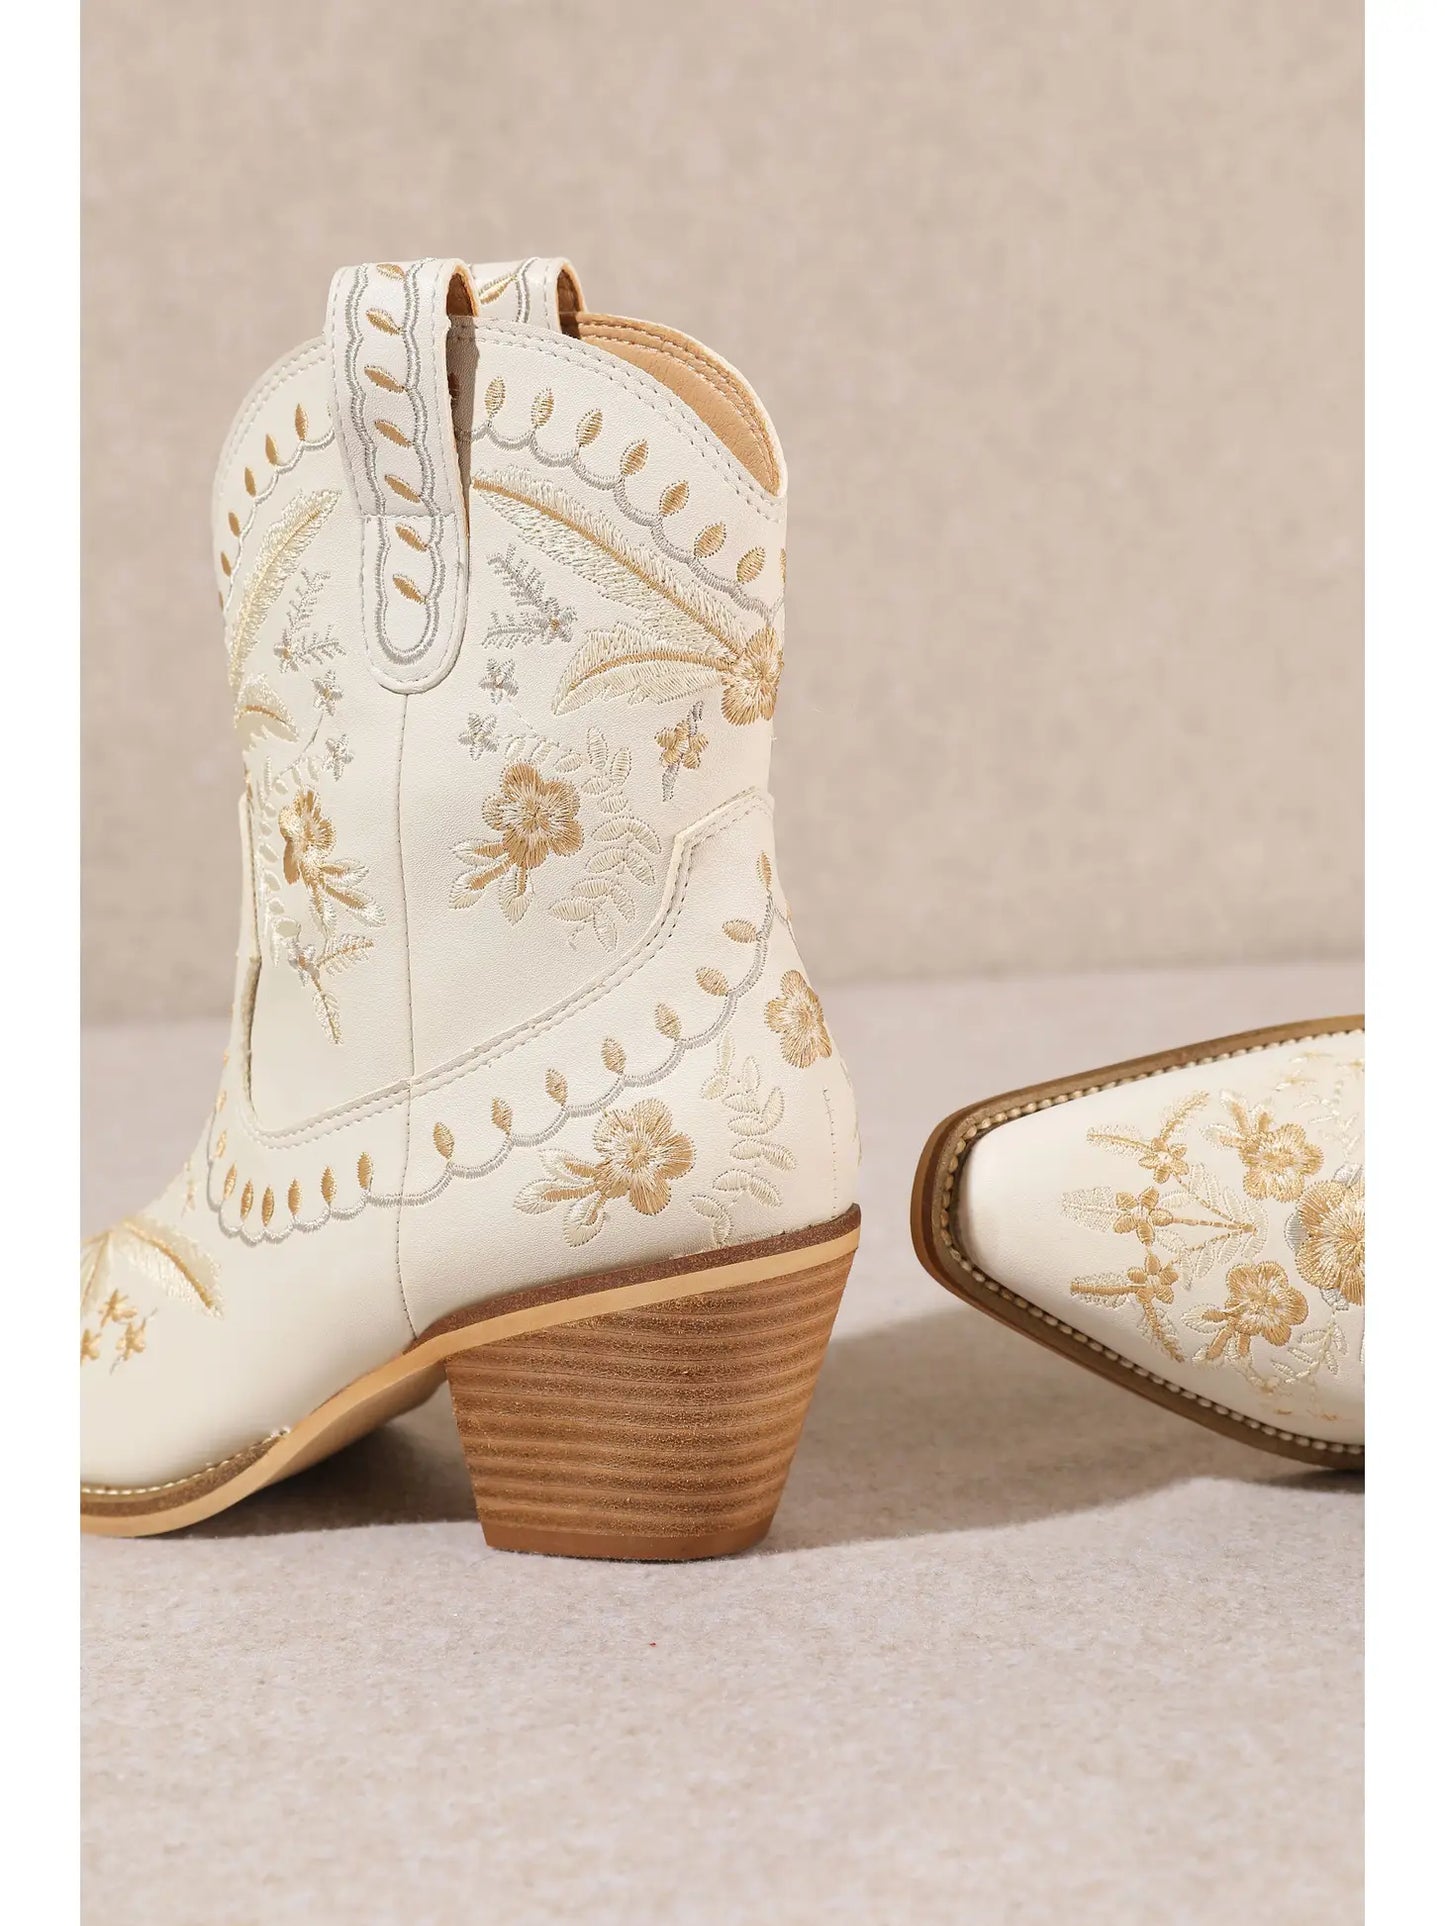 Corral Point Toe Floral Boots